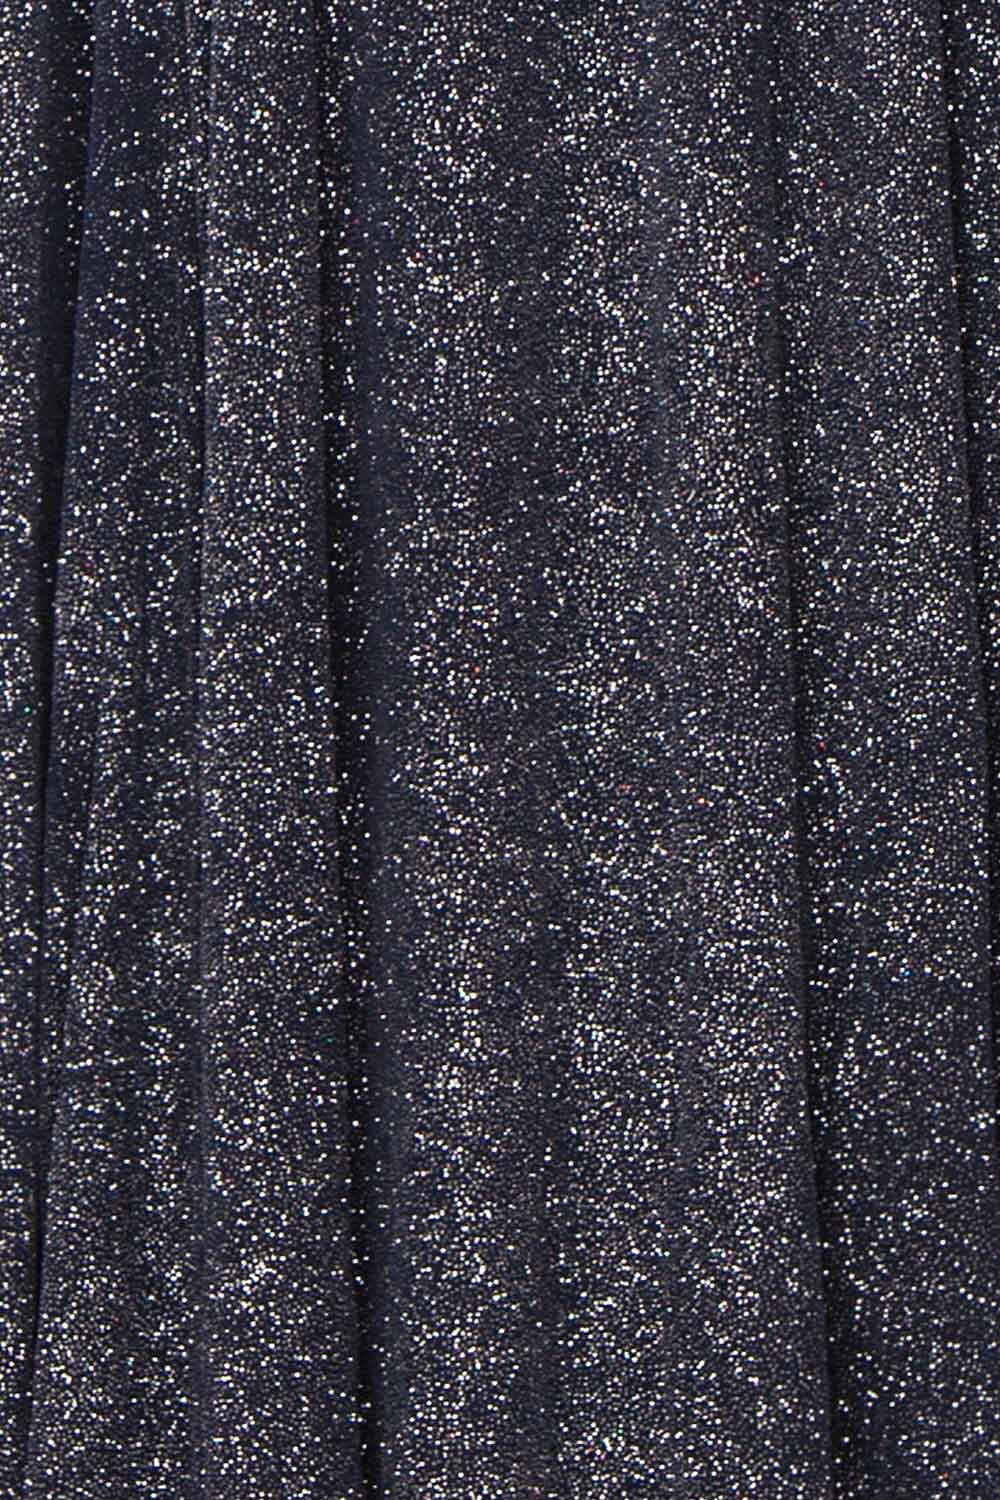 Campozano Navy Shimmery A-Line V-Neck Dress | Boutique 1861 fabric detail 